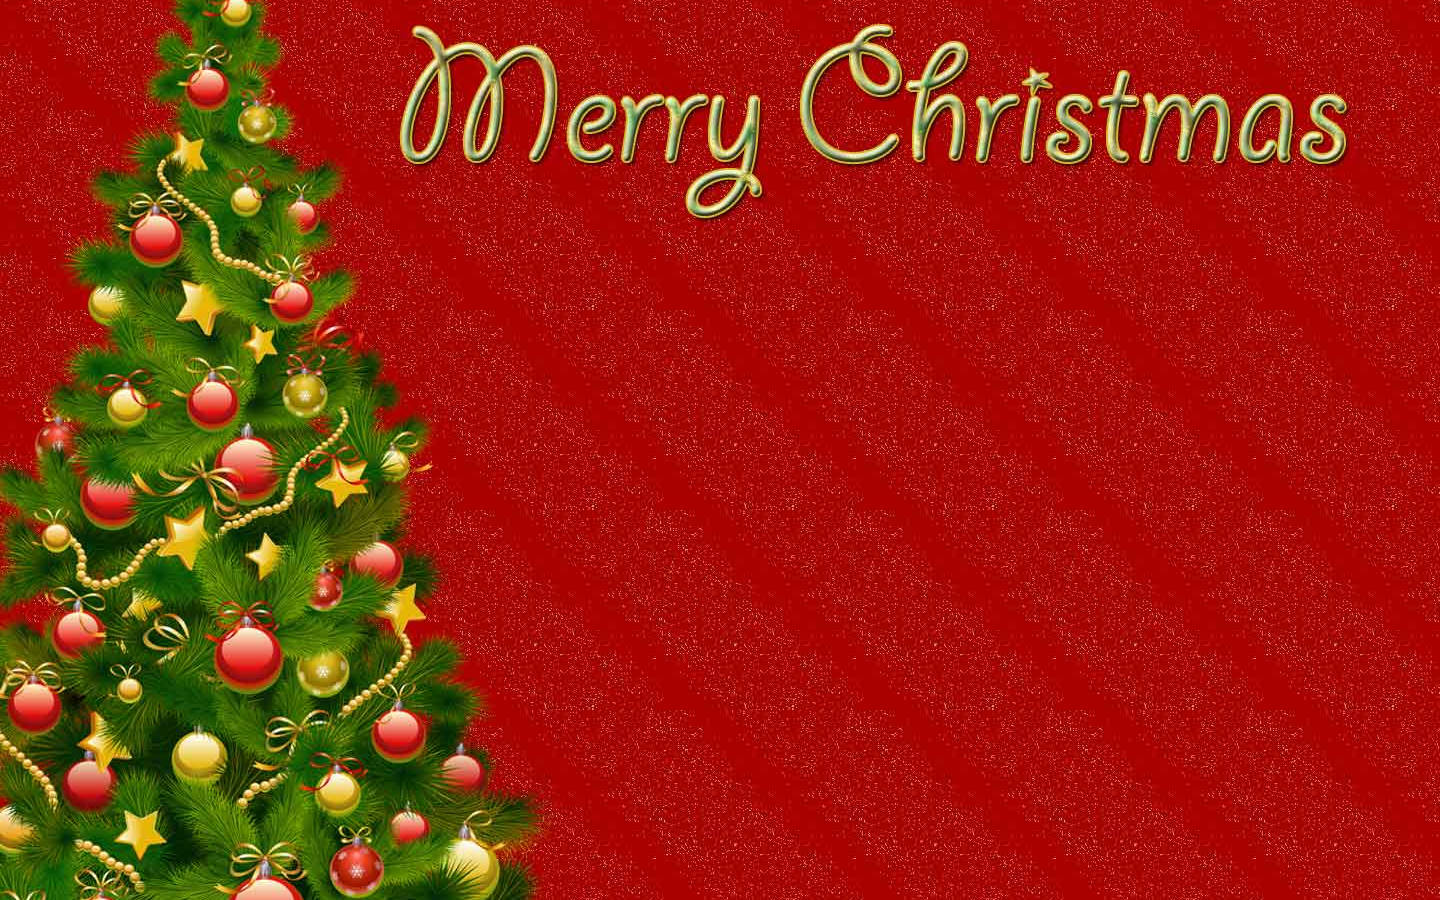 Holiday Greetings On Red Christmas Background